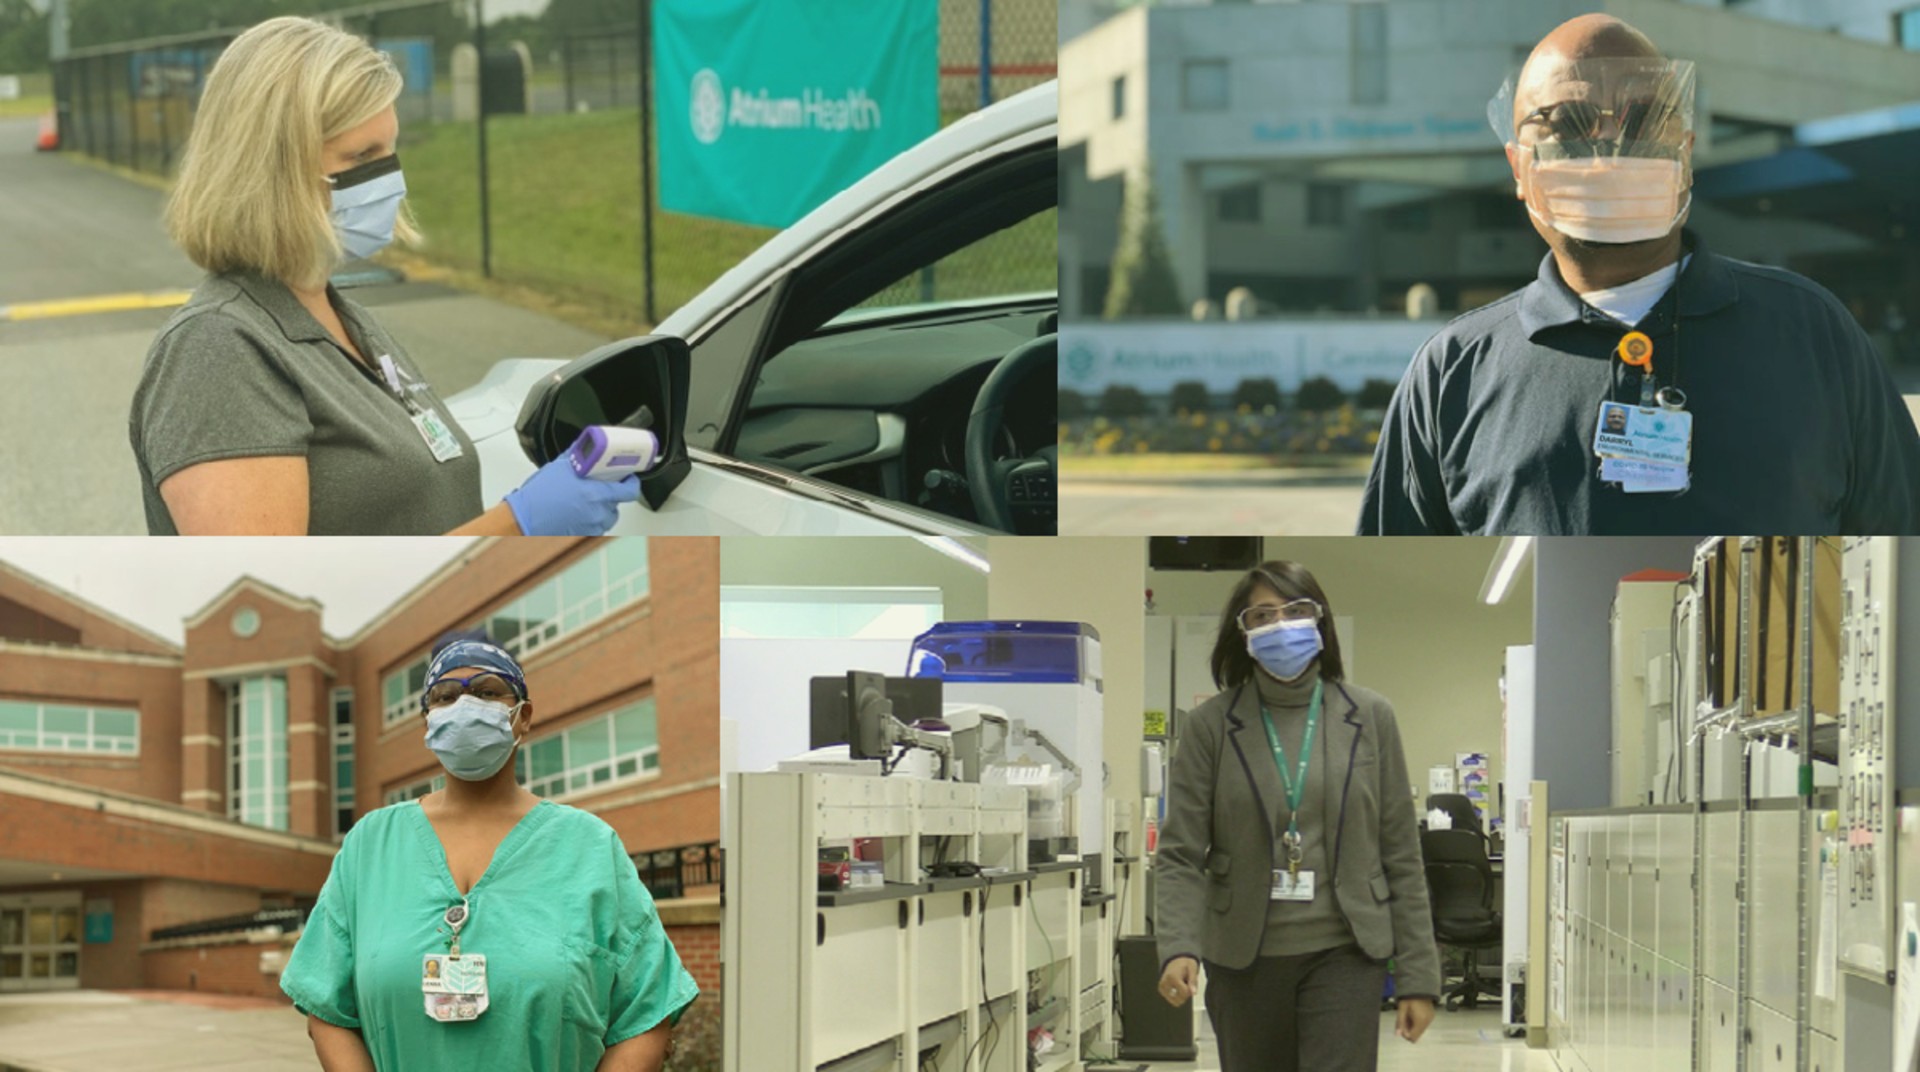 As healthcare workers continue to battle the COVID-19 pandemic, four well-deserving Atrium Health teammates will be recognized for their service and sacrifice with a trip to Super Bowl LV in Tampa, Fla.